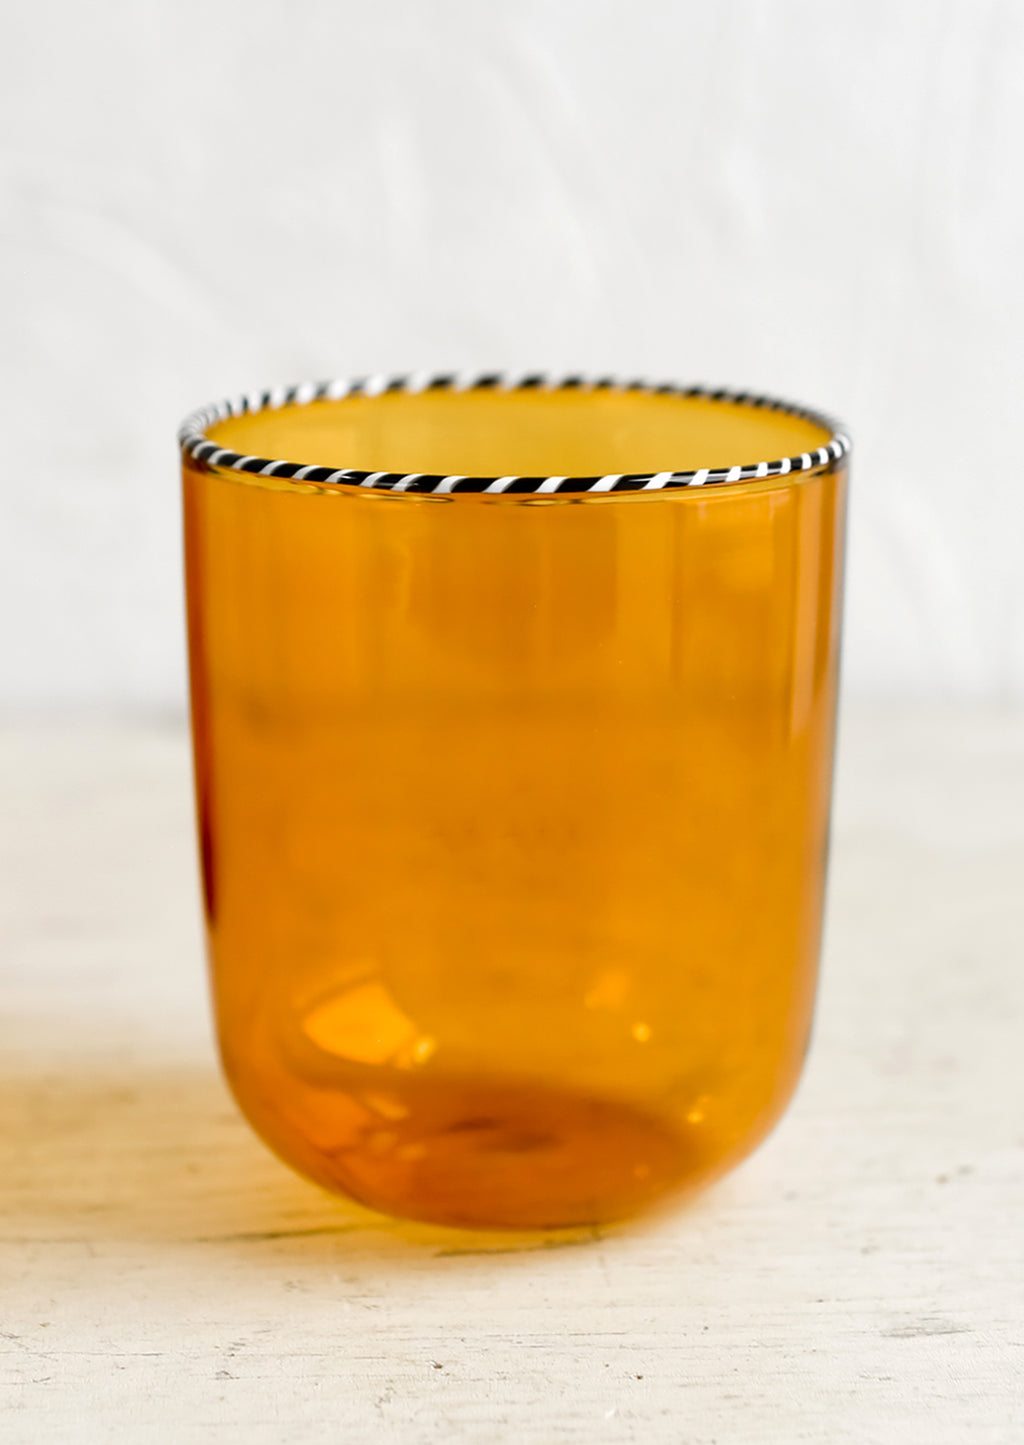 Amber: A transparent glass tumbler in amber color with black and white striped rim.